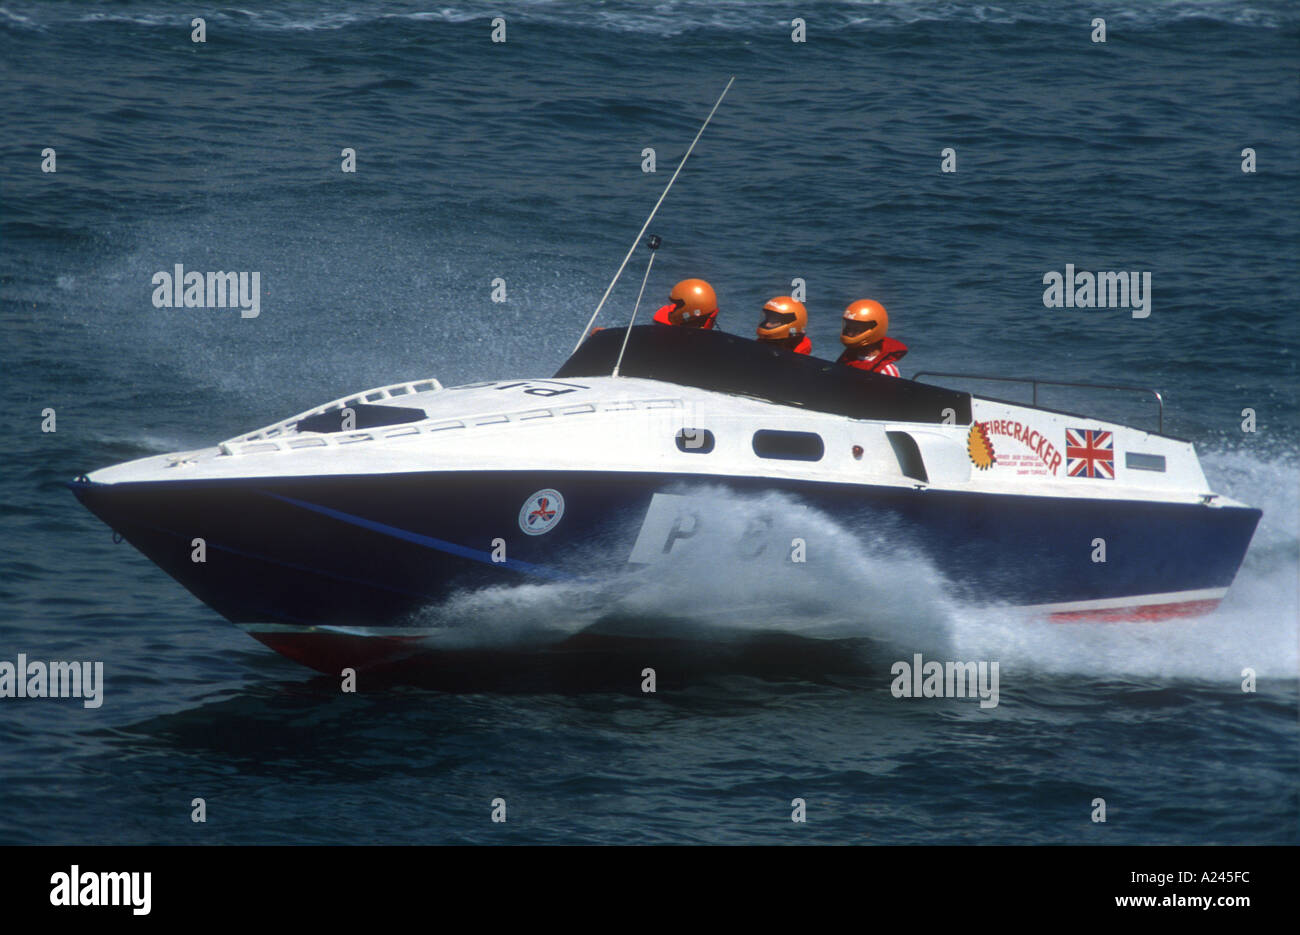 The NCB class offshore powerboat Firecracker at Portsmouth Hampshire England Europe Stock Photo